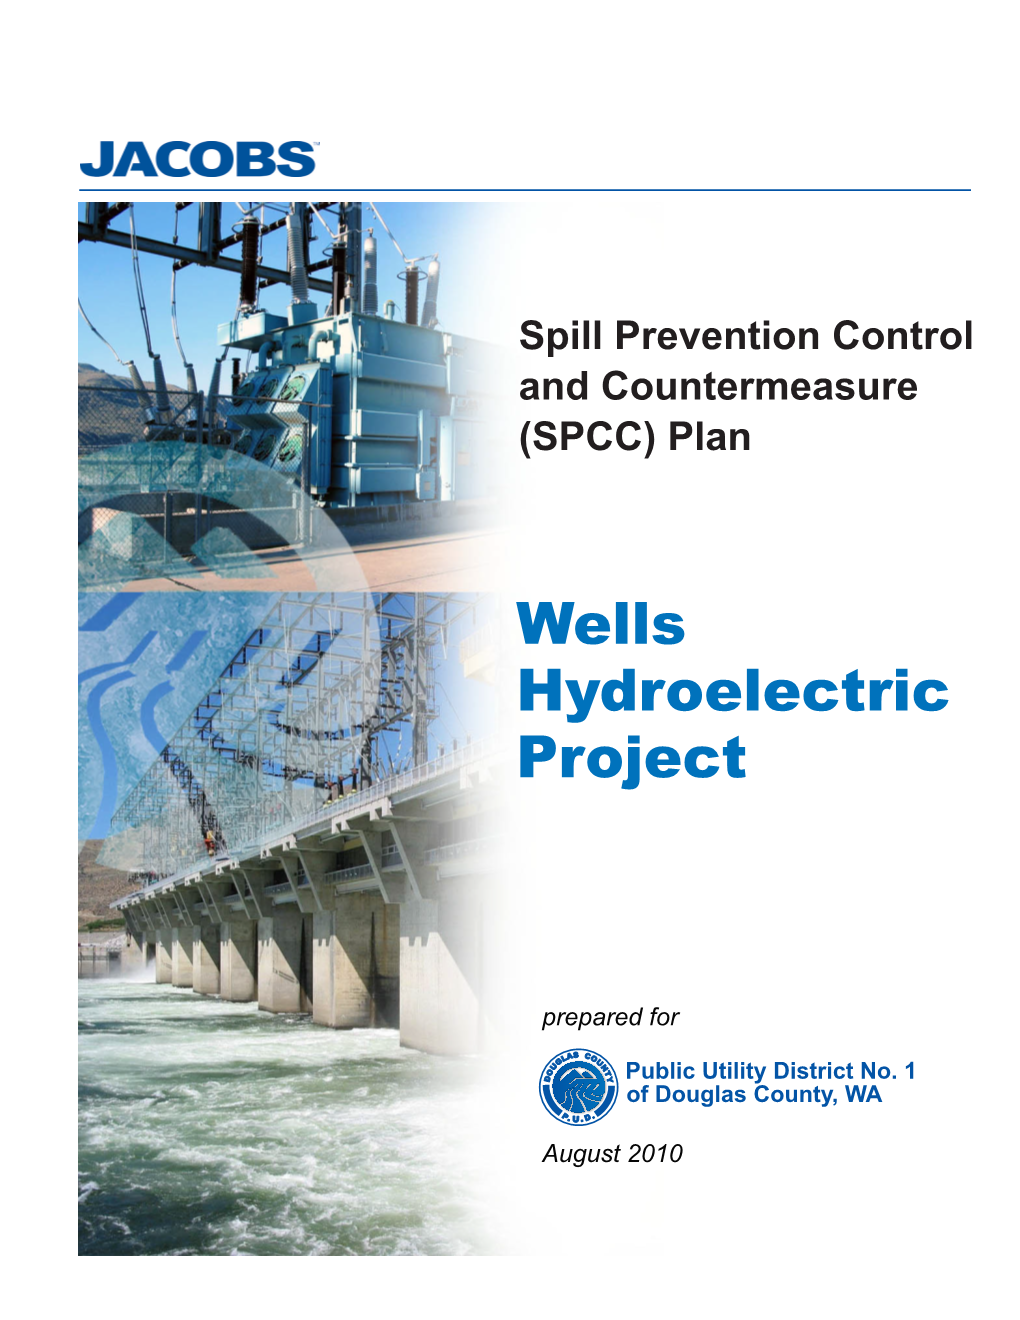 Wells Hydroelectric Project